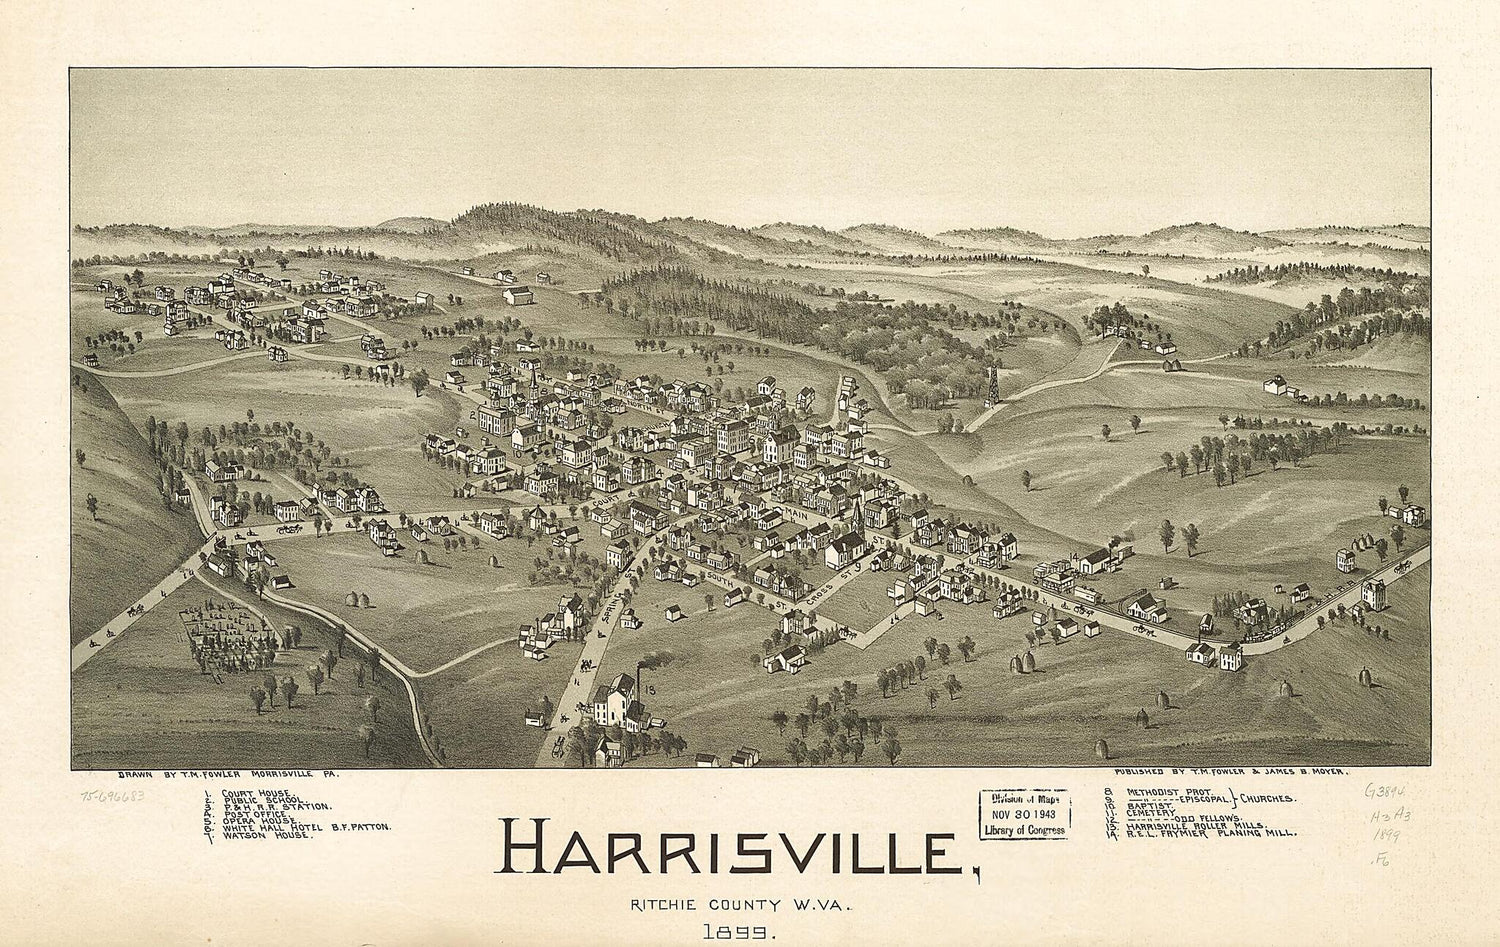 This old map of Harrisville, Ritchie County, W.Va. from 1899 was created by T. M. (Thaddeus Mortimer) Fowler, James B. Moyer in 1899